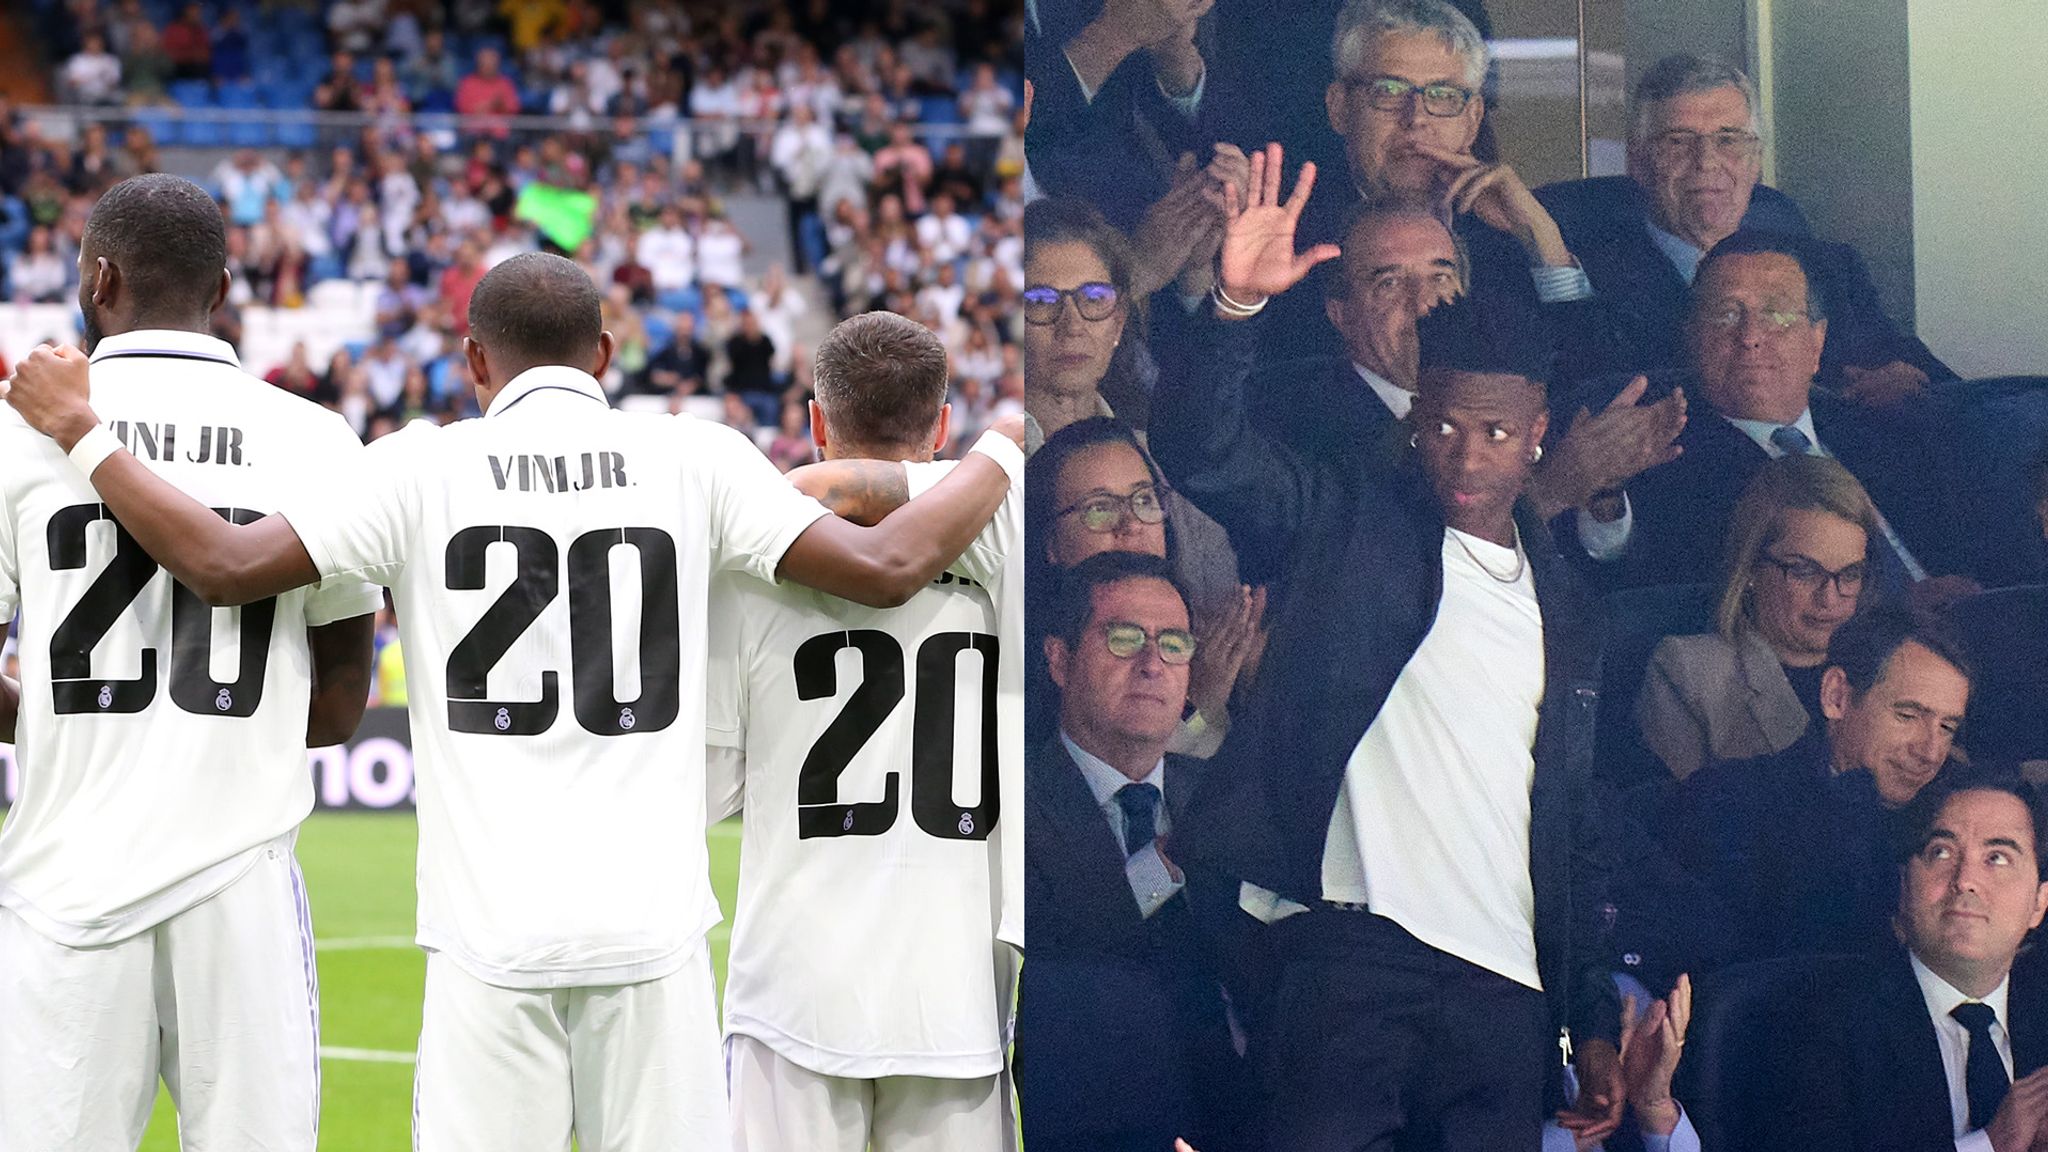 Vinicius Jr already named club he would leave Real Madrid for